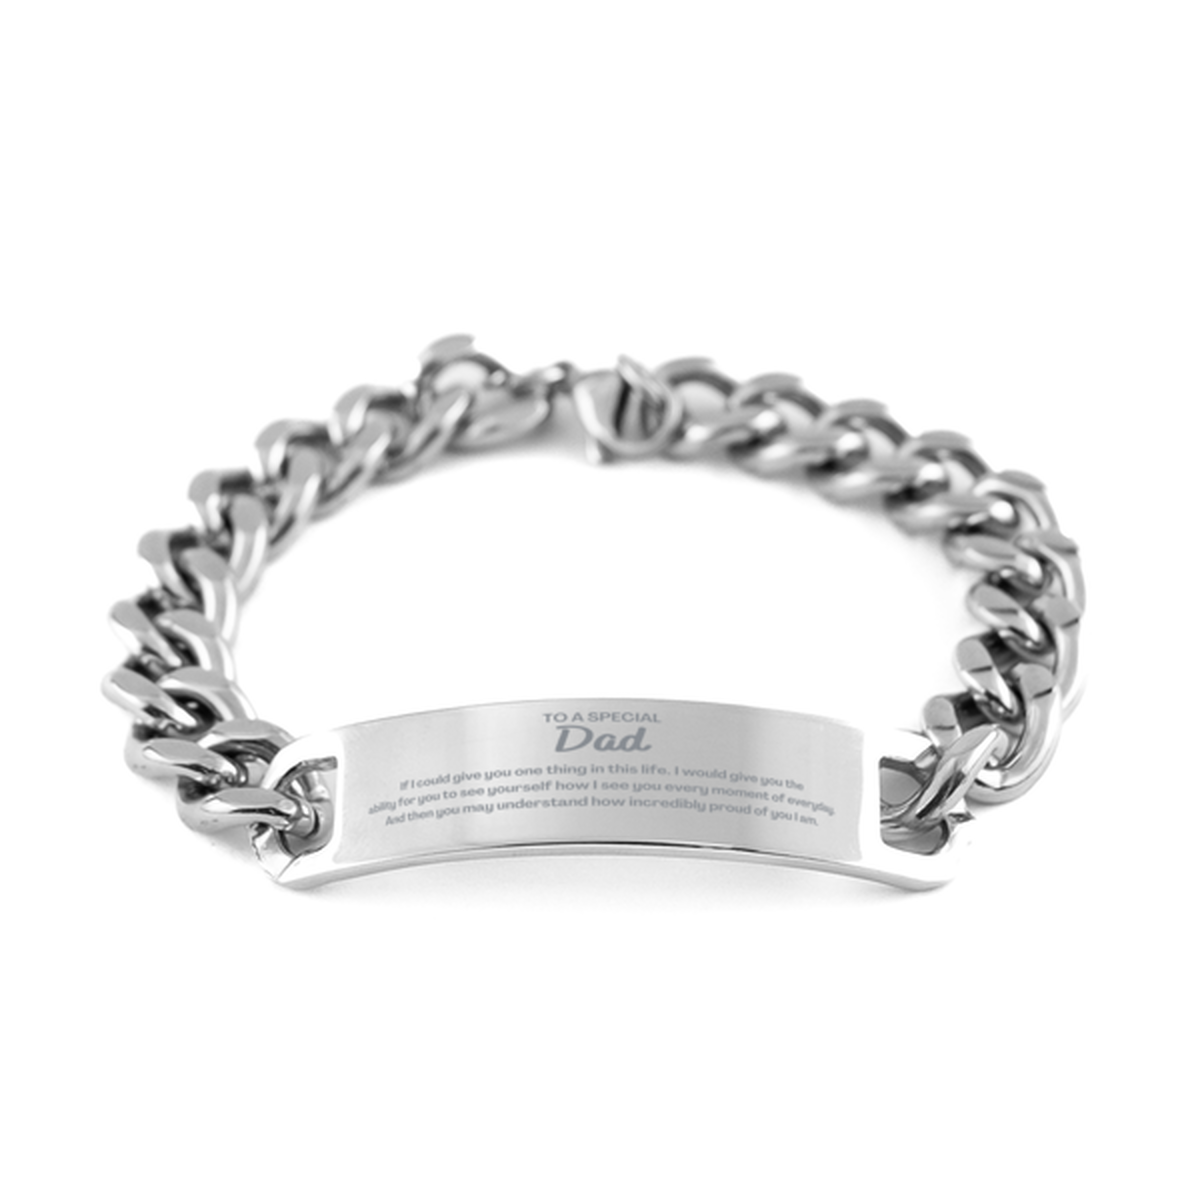 To My Dad Cuban Chain Stainless Steel Bracelet, Gifts For Dad Engraved, Inspirational Gifts for Christmas Birthday, Epic Gifts for Dad To A Special Dad how incredibly proud of you I am